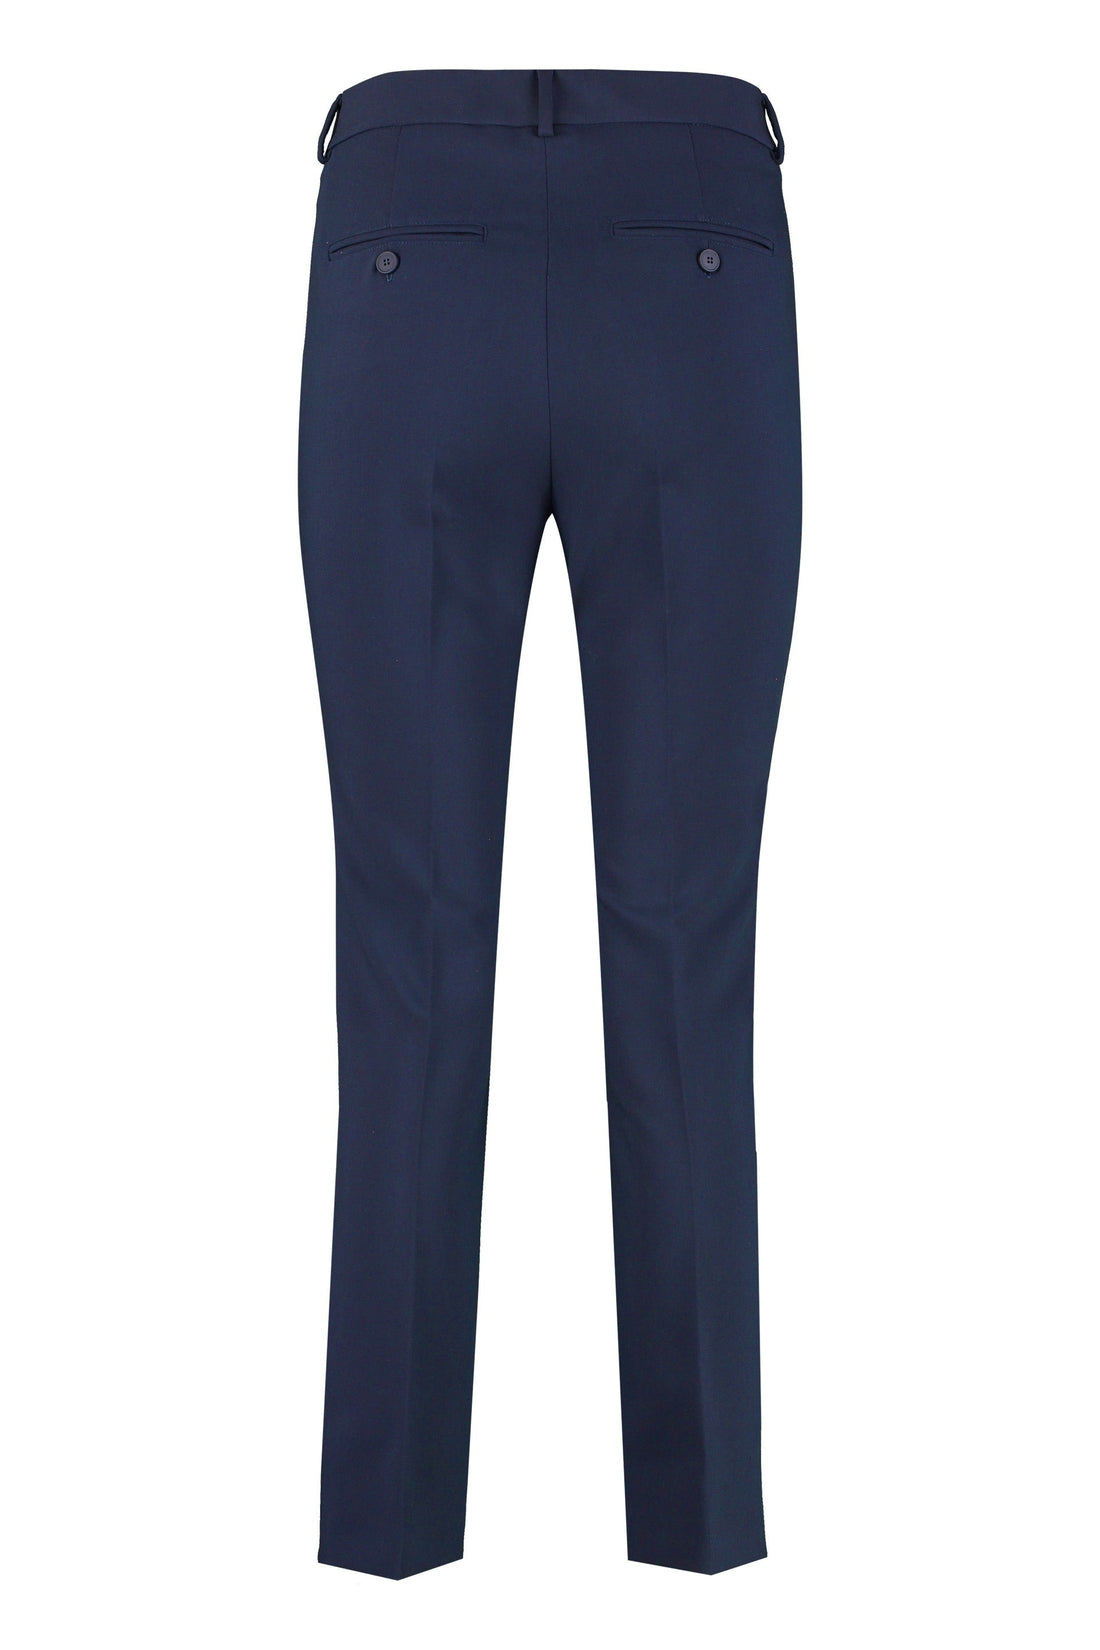 Max Mara-OUTLET-SALE-Leone tailored trousers-ARCHIVIST